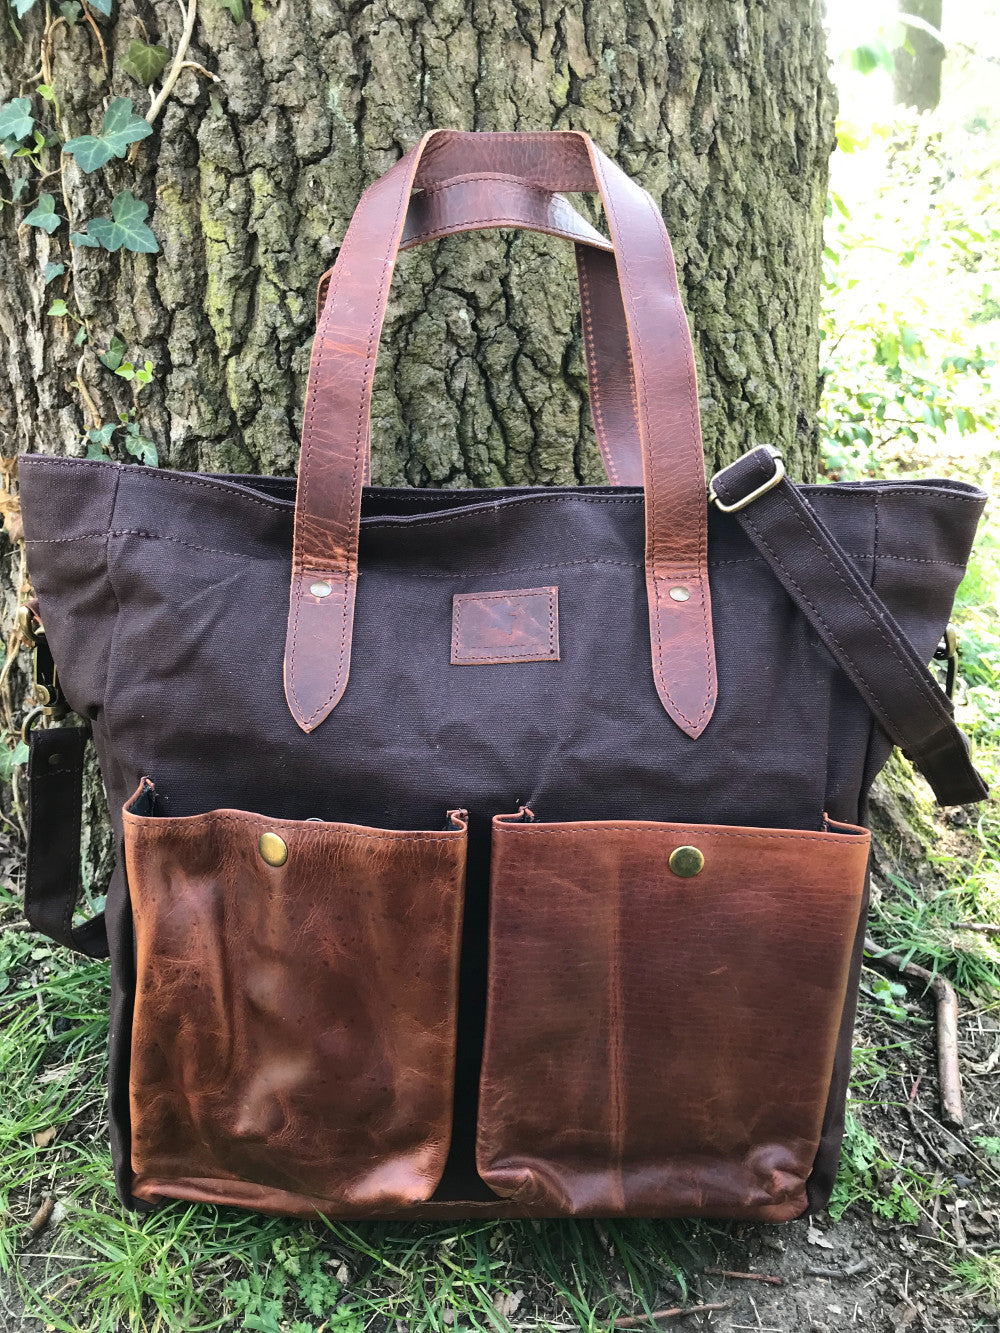 The Bingham.  A large zipped tote bag by Burghley Bags.  Handmade from eco-friendly vegetable tanned leather and strong cotton canvas, with a canvas shoulder strap. Shown in stylish maroon.